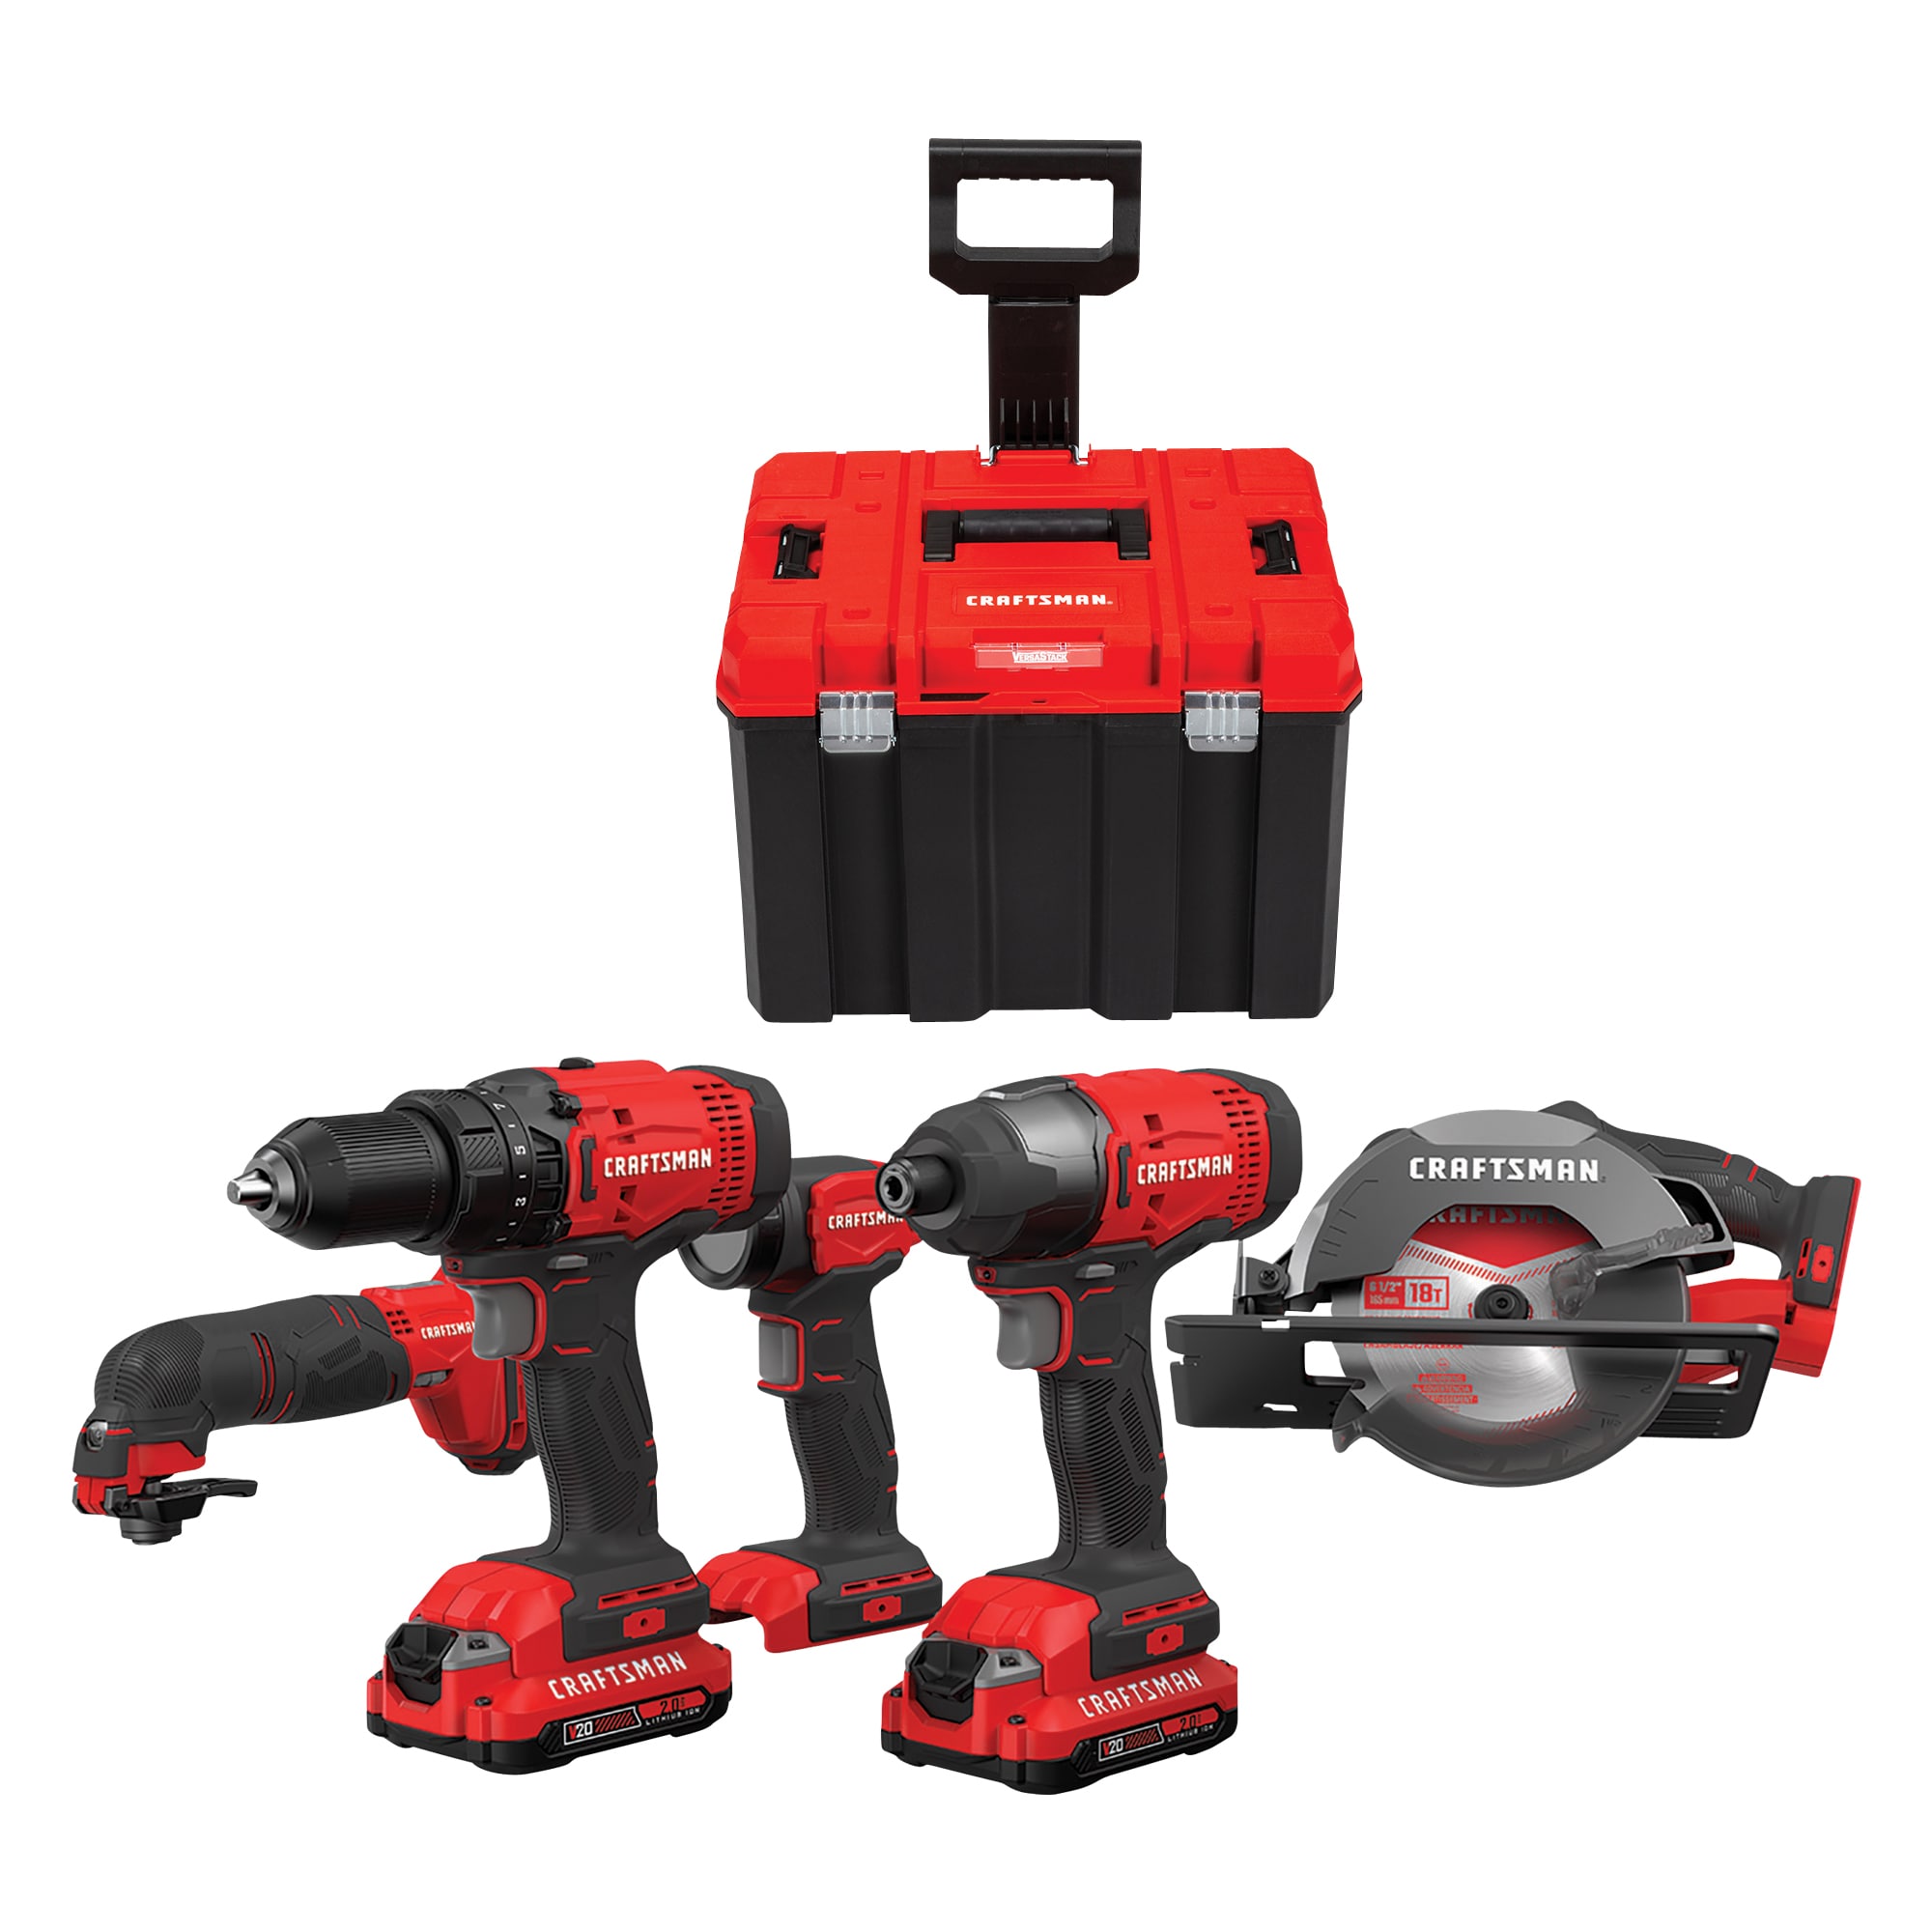 CRAFTSMAN V20 5-Tool 20-Volt Max Power Tool Combo Kit with Soft Case & VERSASTACK System 20-in Red Plastic Wheels Lockable Tool Box